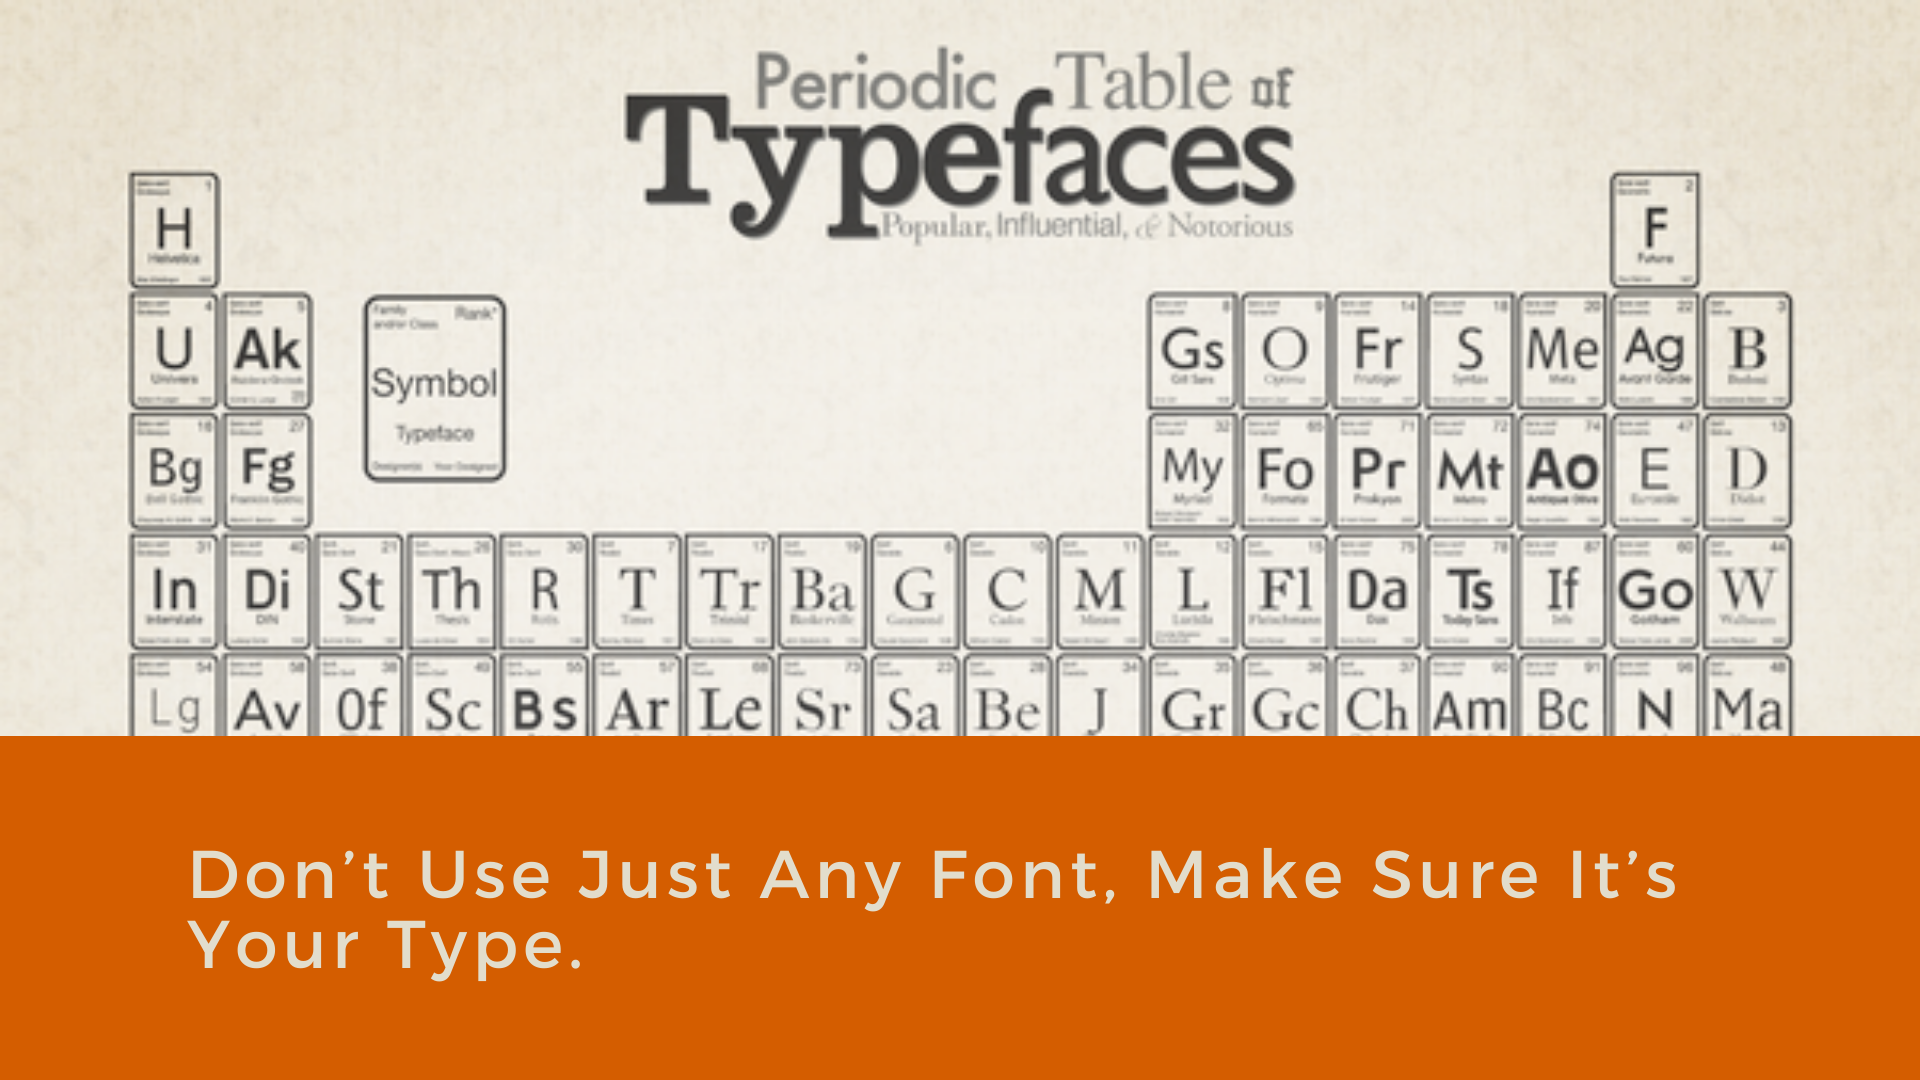 Don’t Use Just Any Font, Make Sure It’s Your Type.